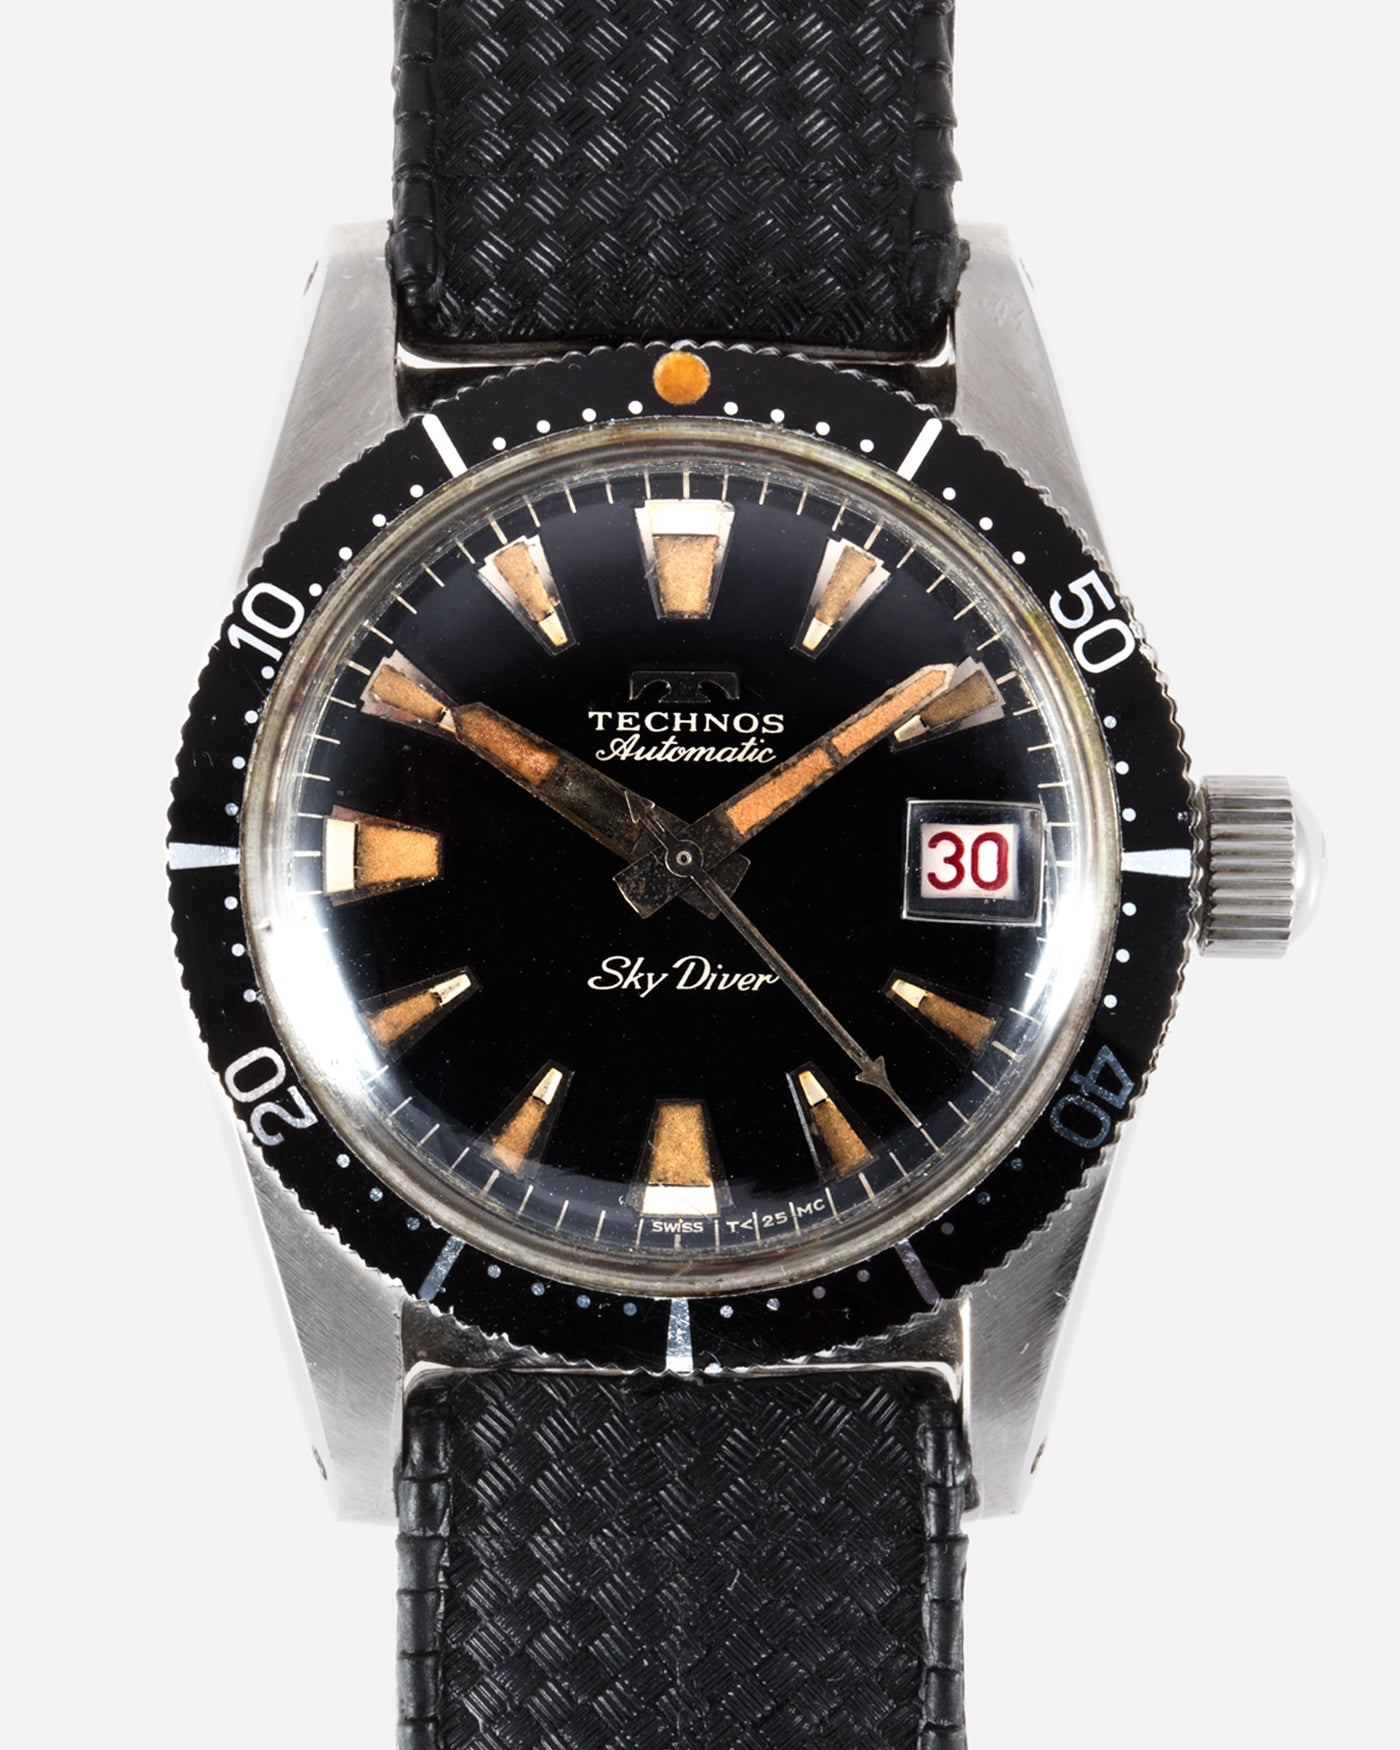 Technos Skydiver Vintage Diver Watch | S.Song Vintage Watches – S.Song